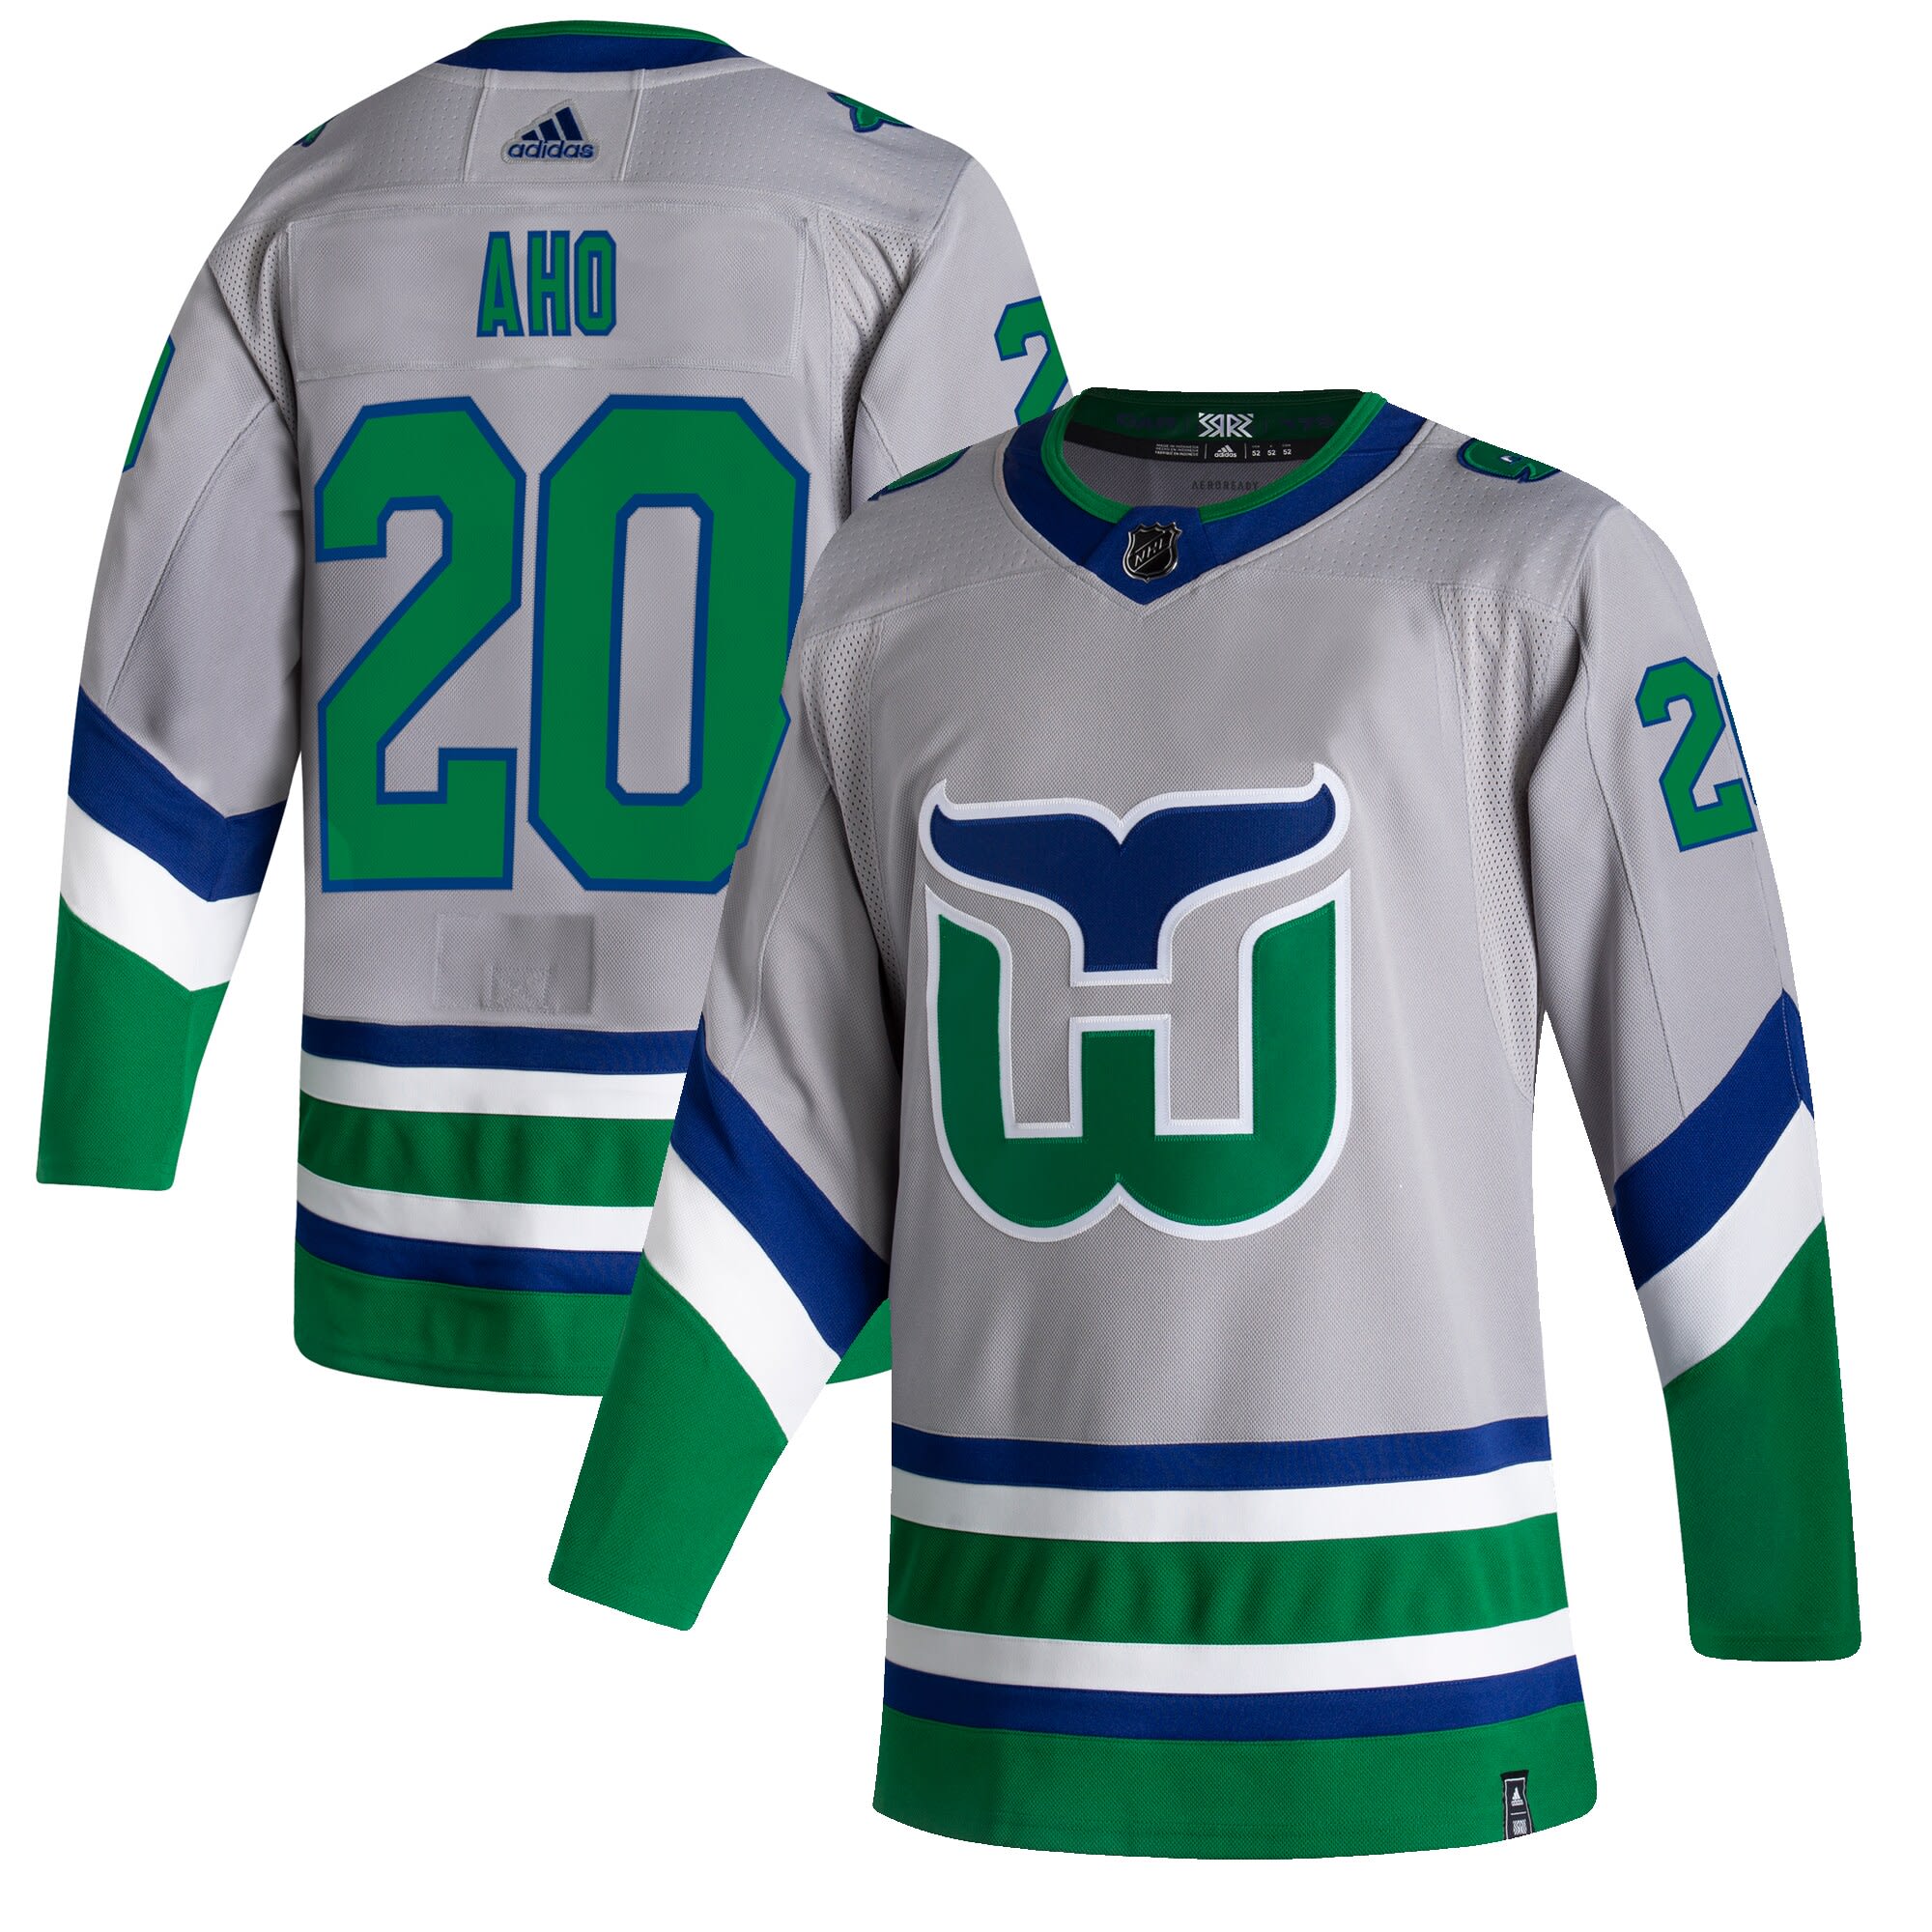 Hurricanes to Wear White Whalers Throwbacks, Cooperalls in Warmups ...